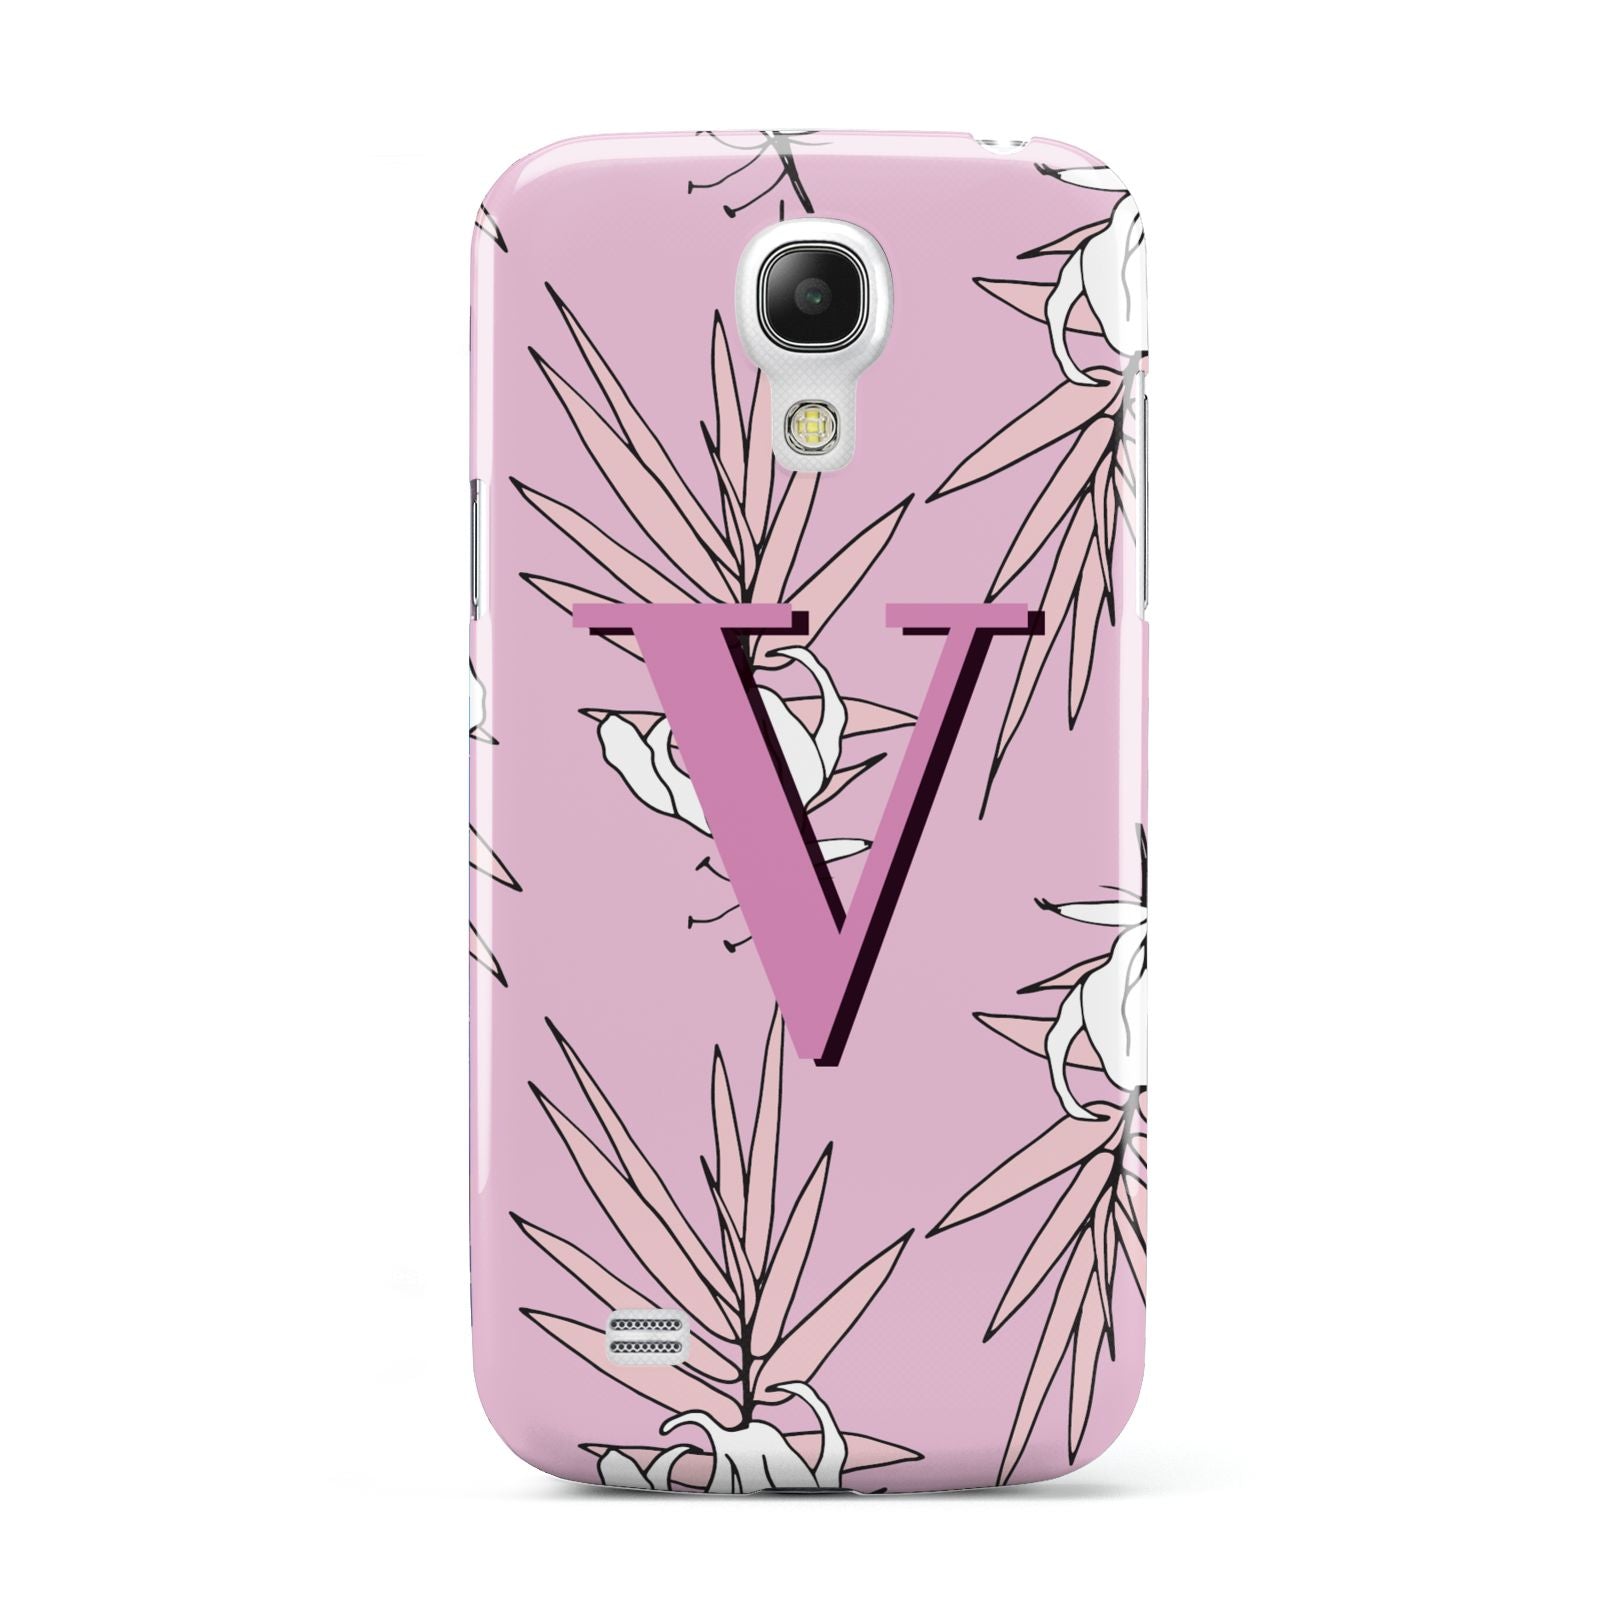 Personalised Pink and White Floral Monogram Samsung Galaxy S4 Mini Case